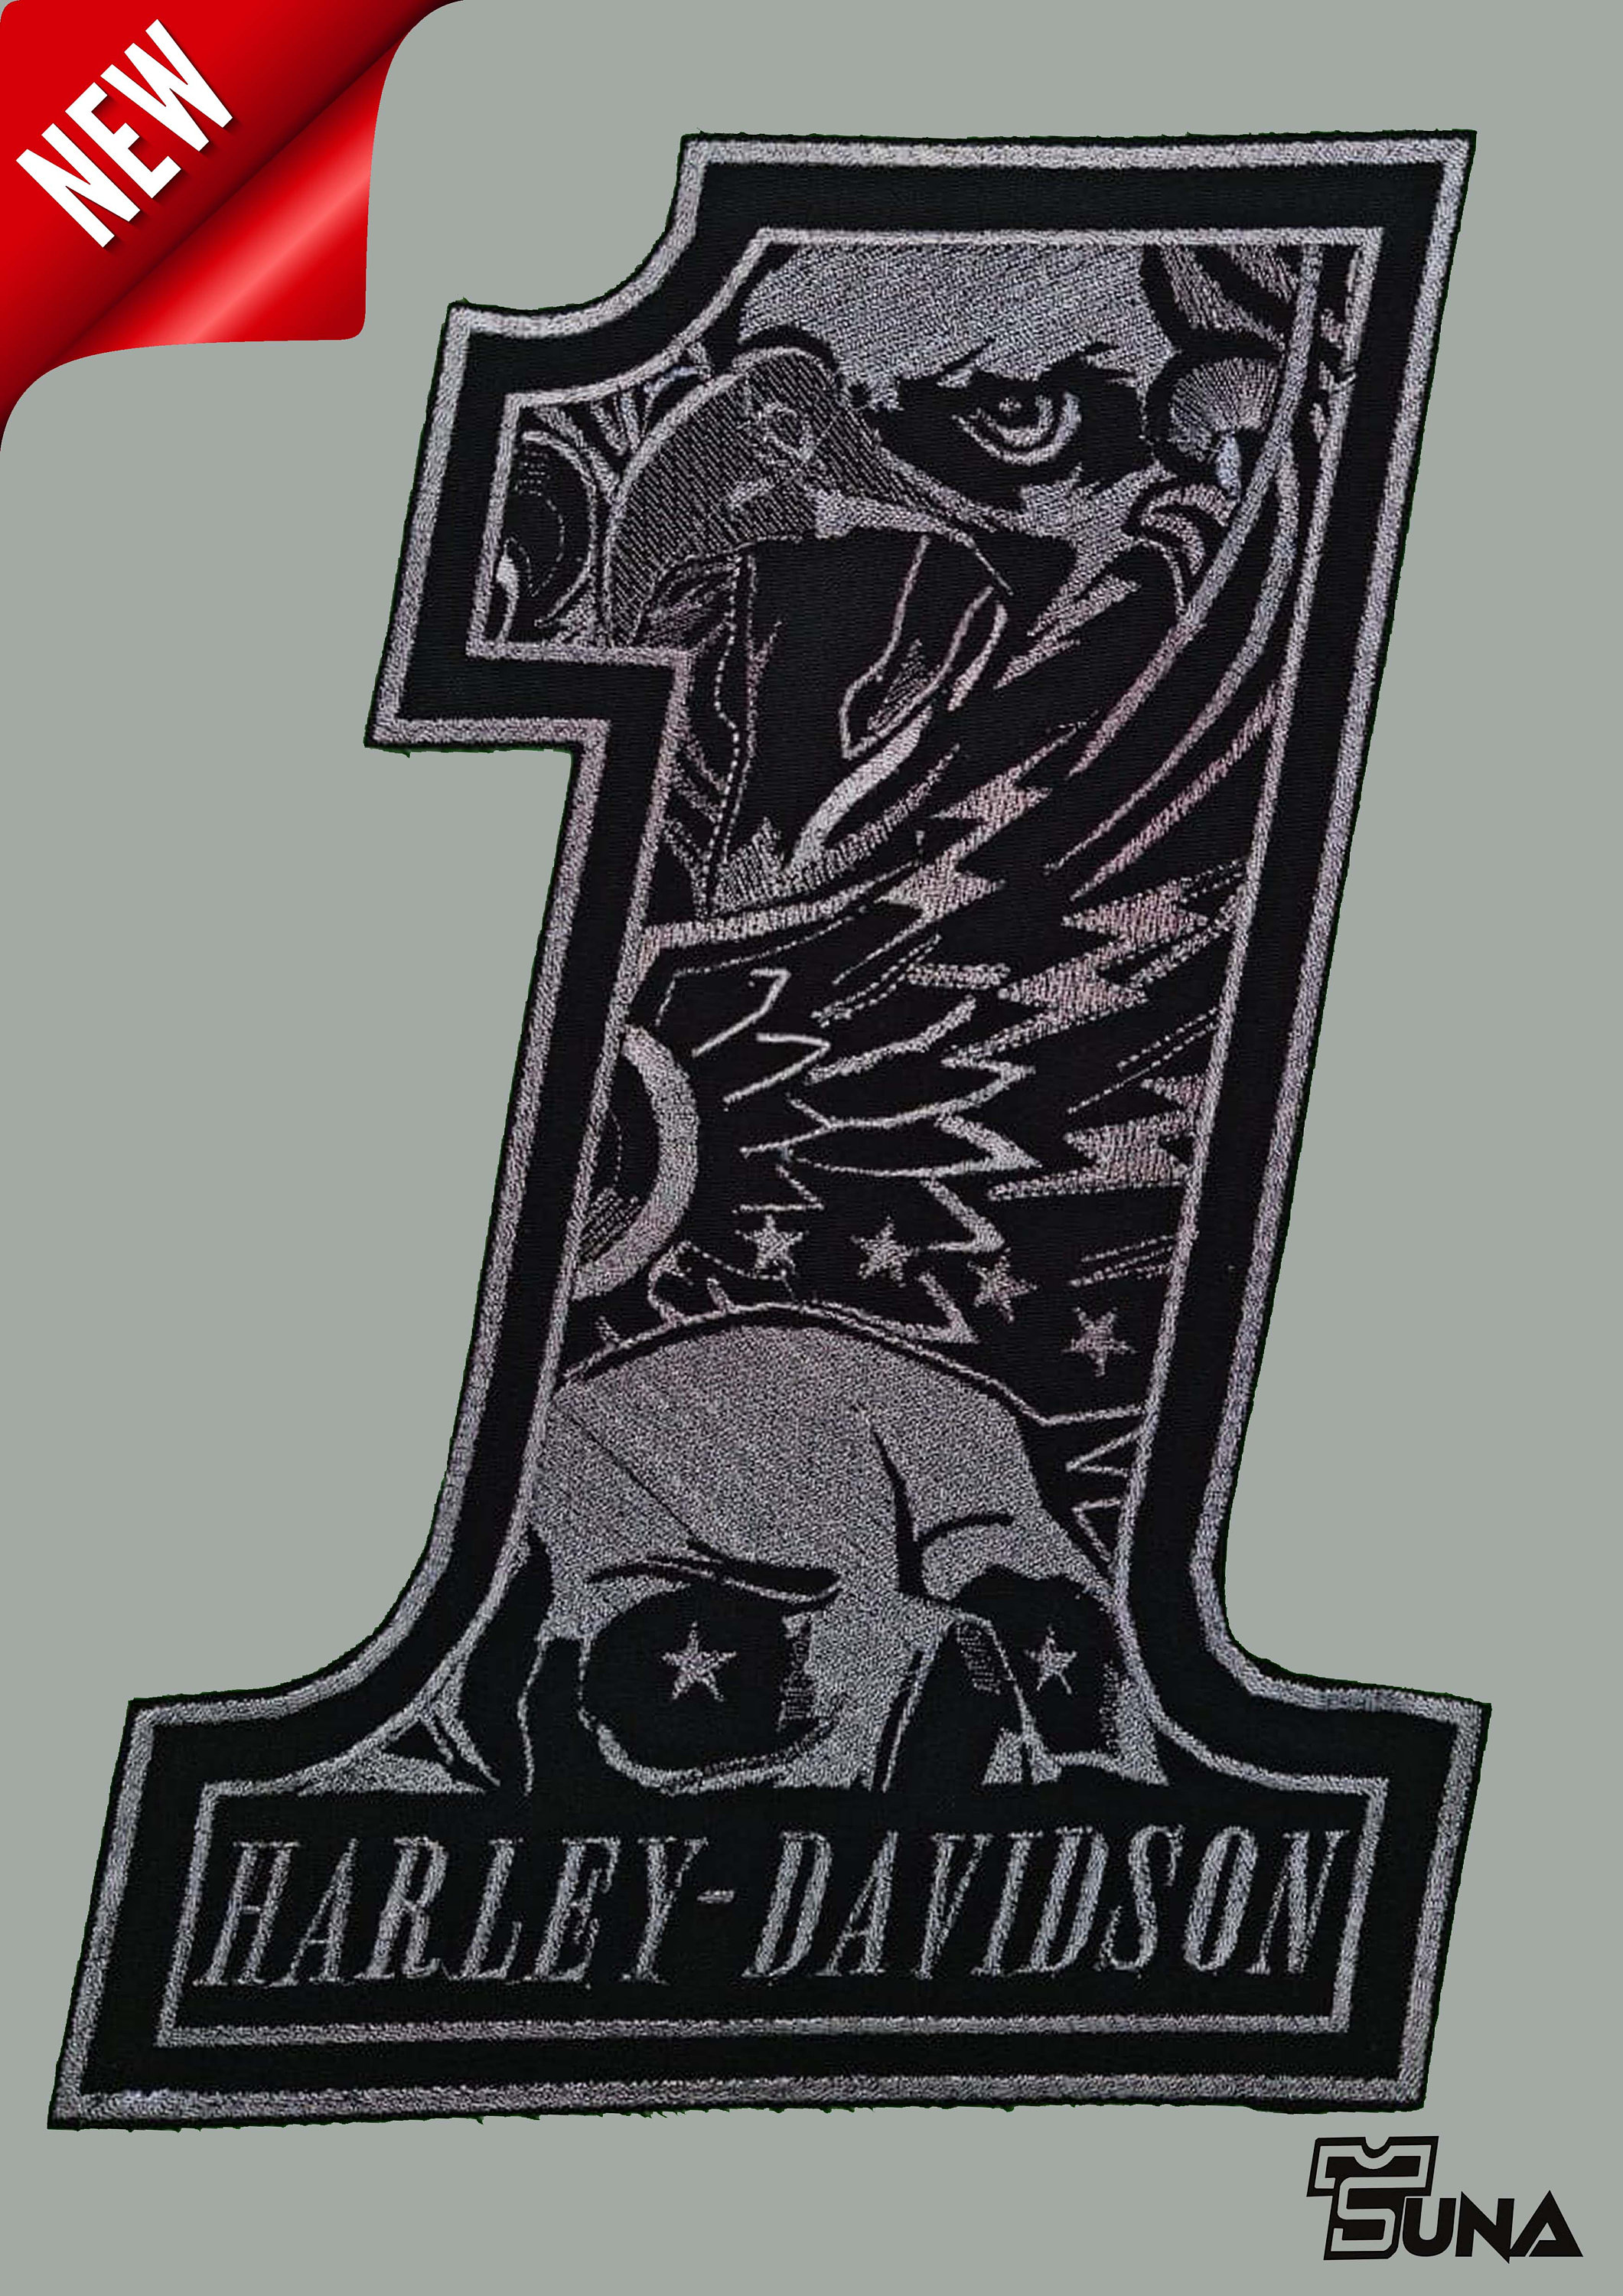 Gray Harley Davidson Patch Motorcycle Embroidered Large Iron on